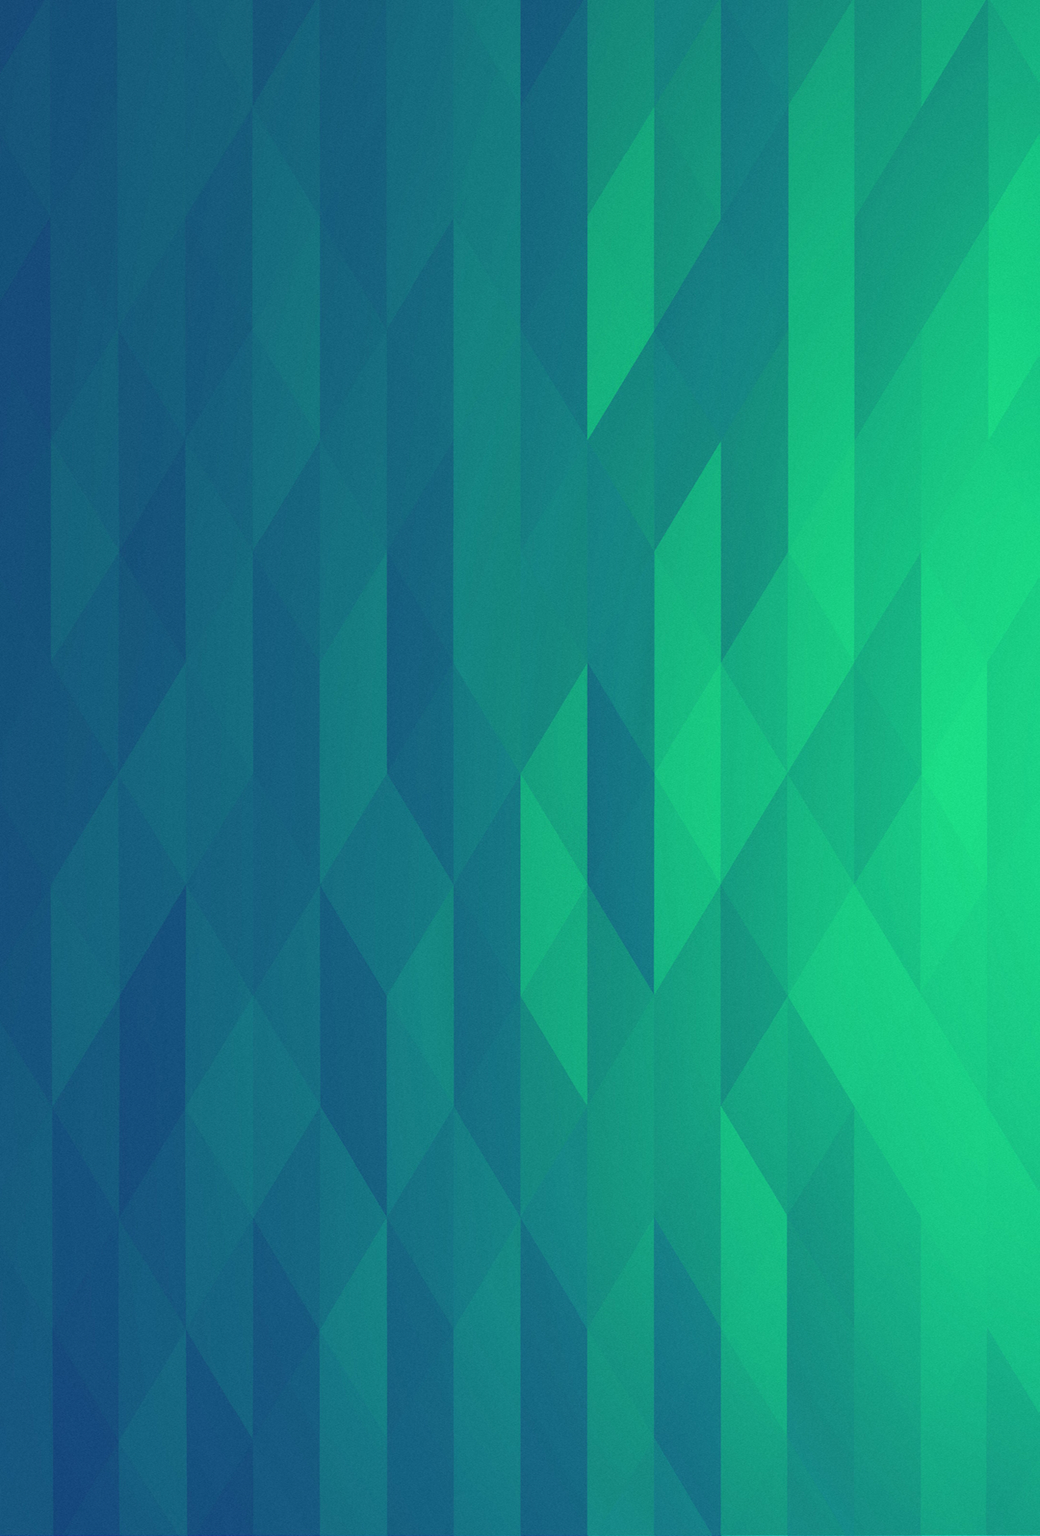 Leaked Htc M8 Default Wallpapers For Iphone 5/5c/5s - Blue And Green Shade - HD Wallpaper 